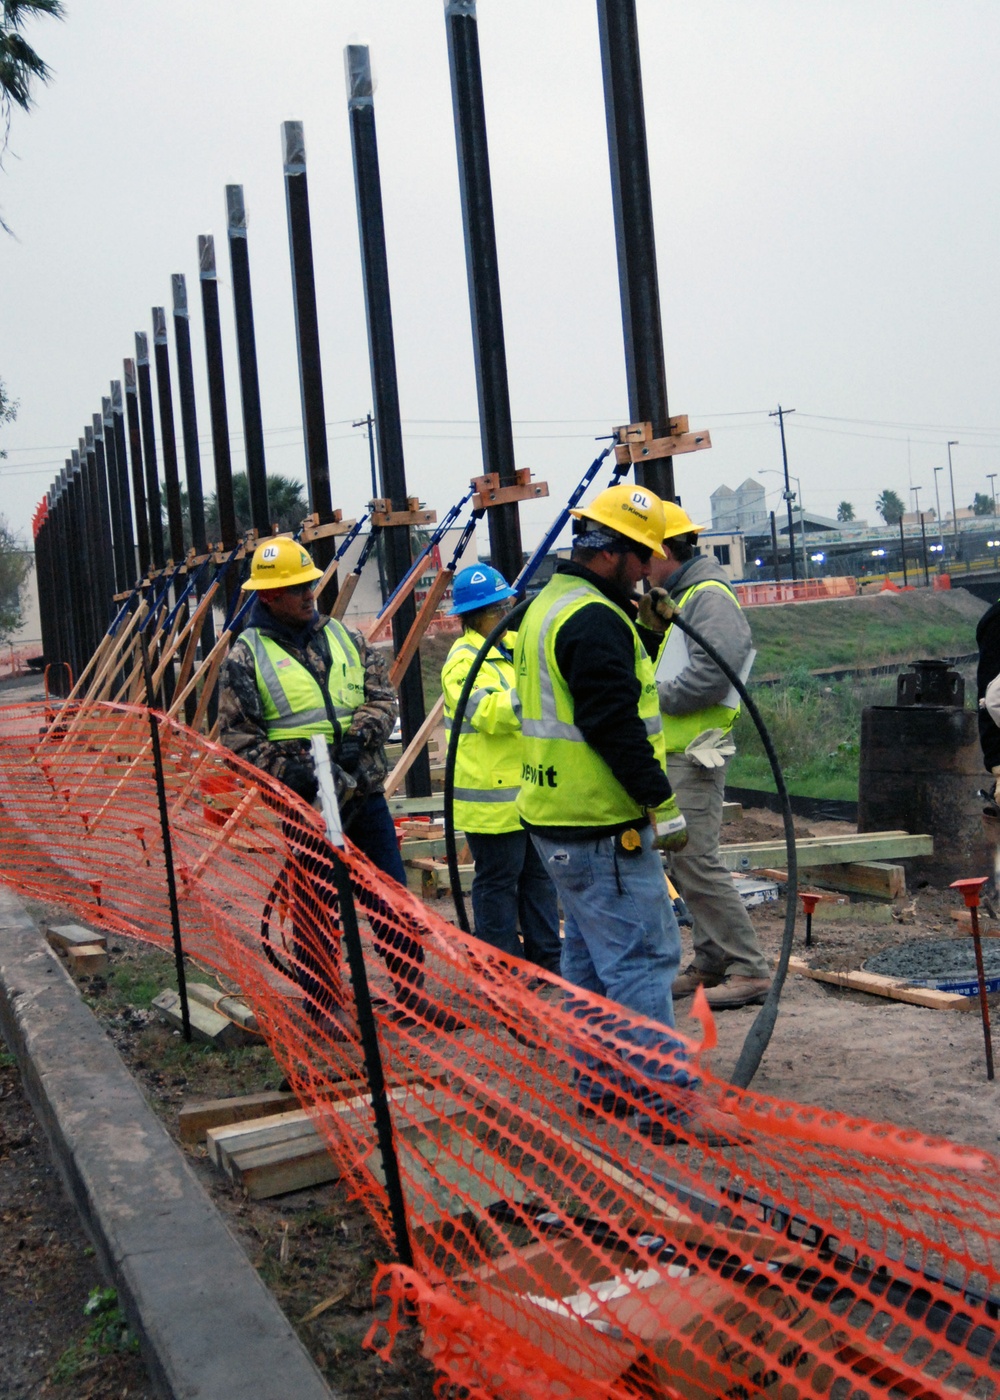 USACE Galveston District Oversees Construction of DHS Border Fence Project in Brownsville